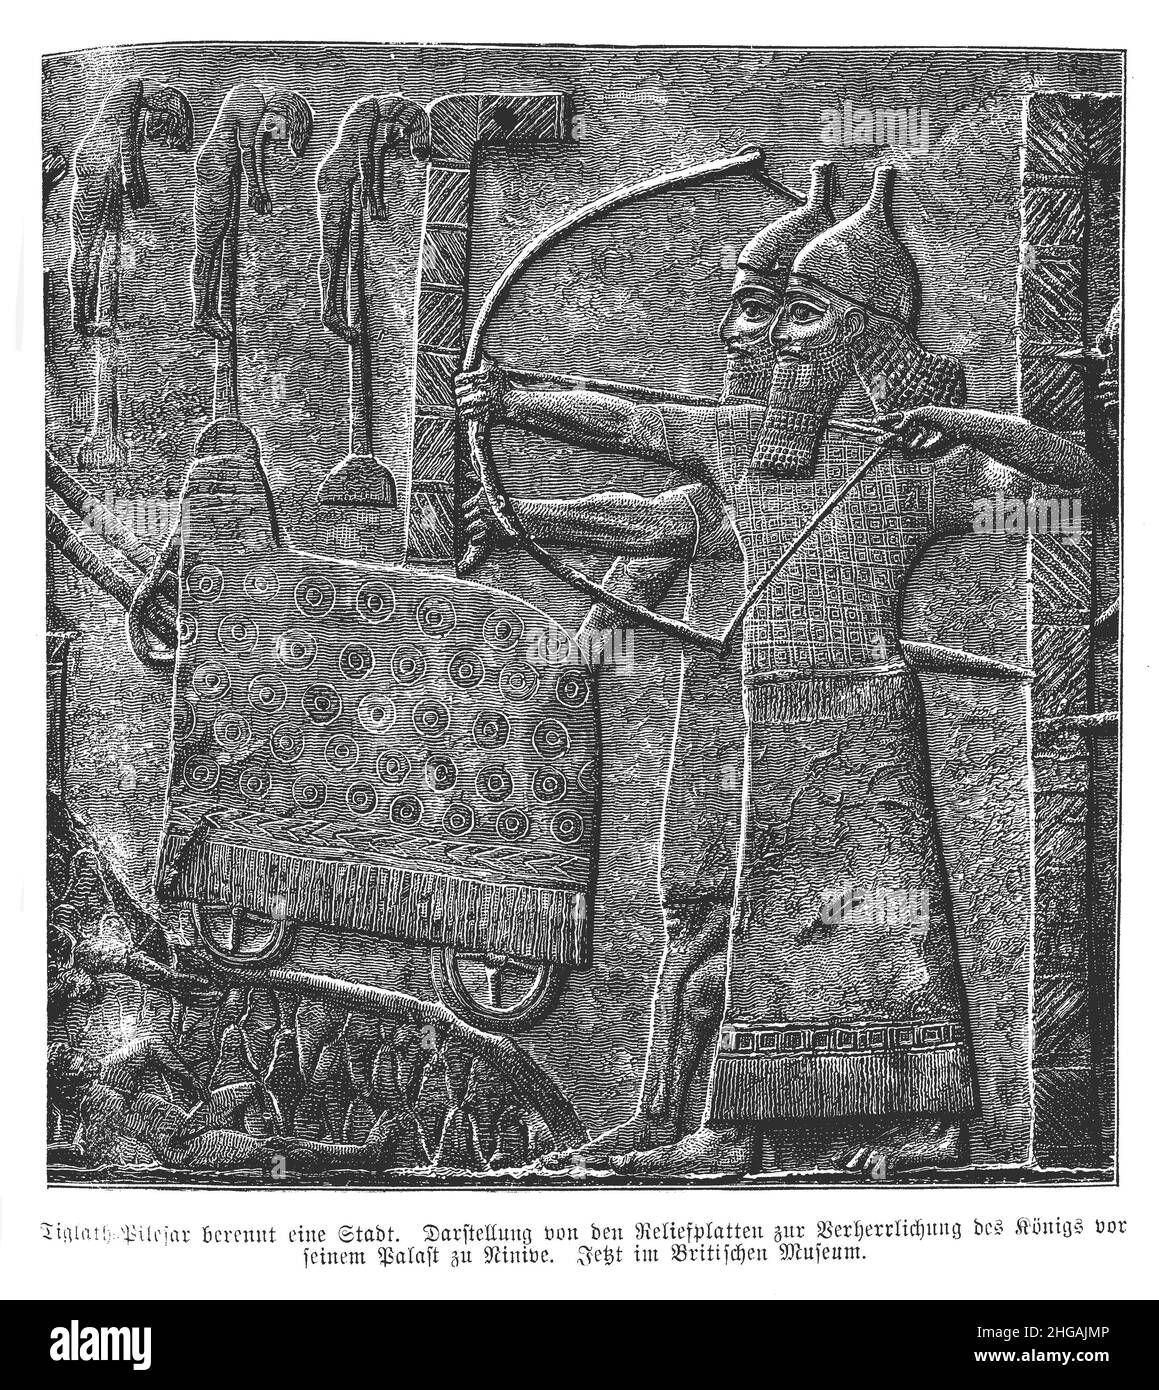 King Tiglath-Pileser III besieging a town, bas-relief from the Central Palace at Nimrud, Assyrian Empire Stock Photo